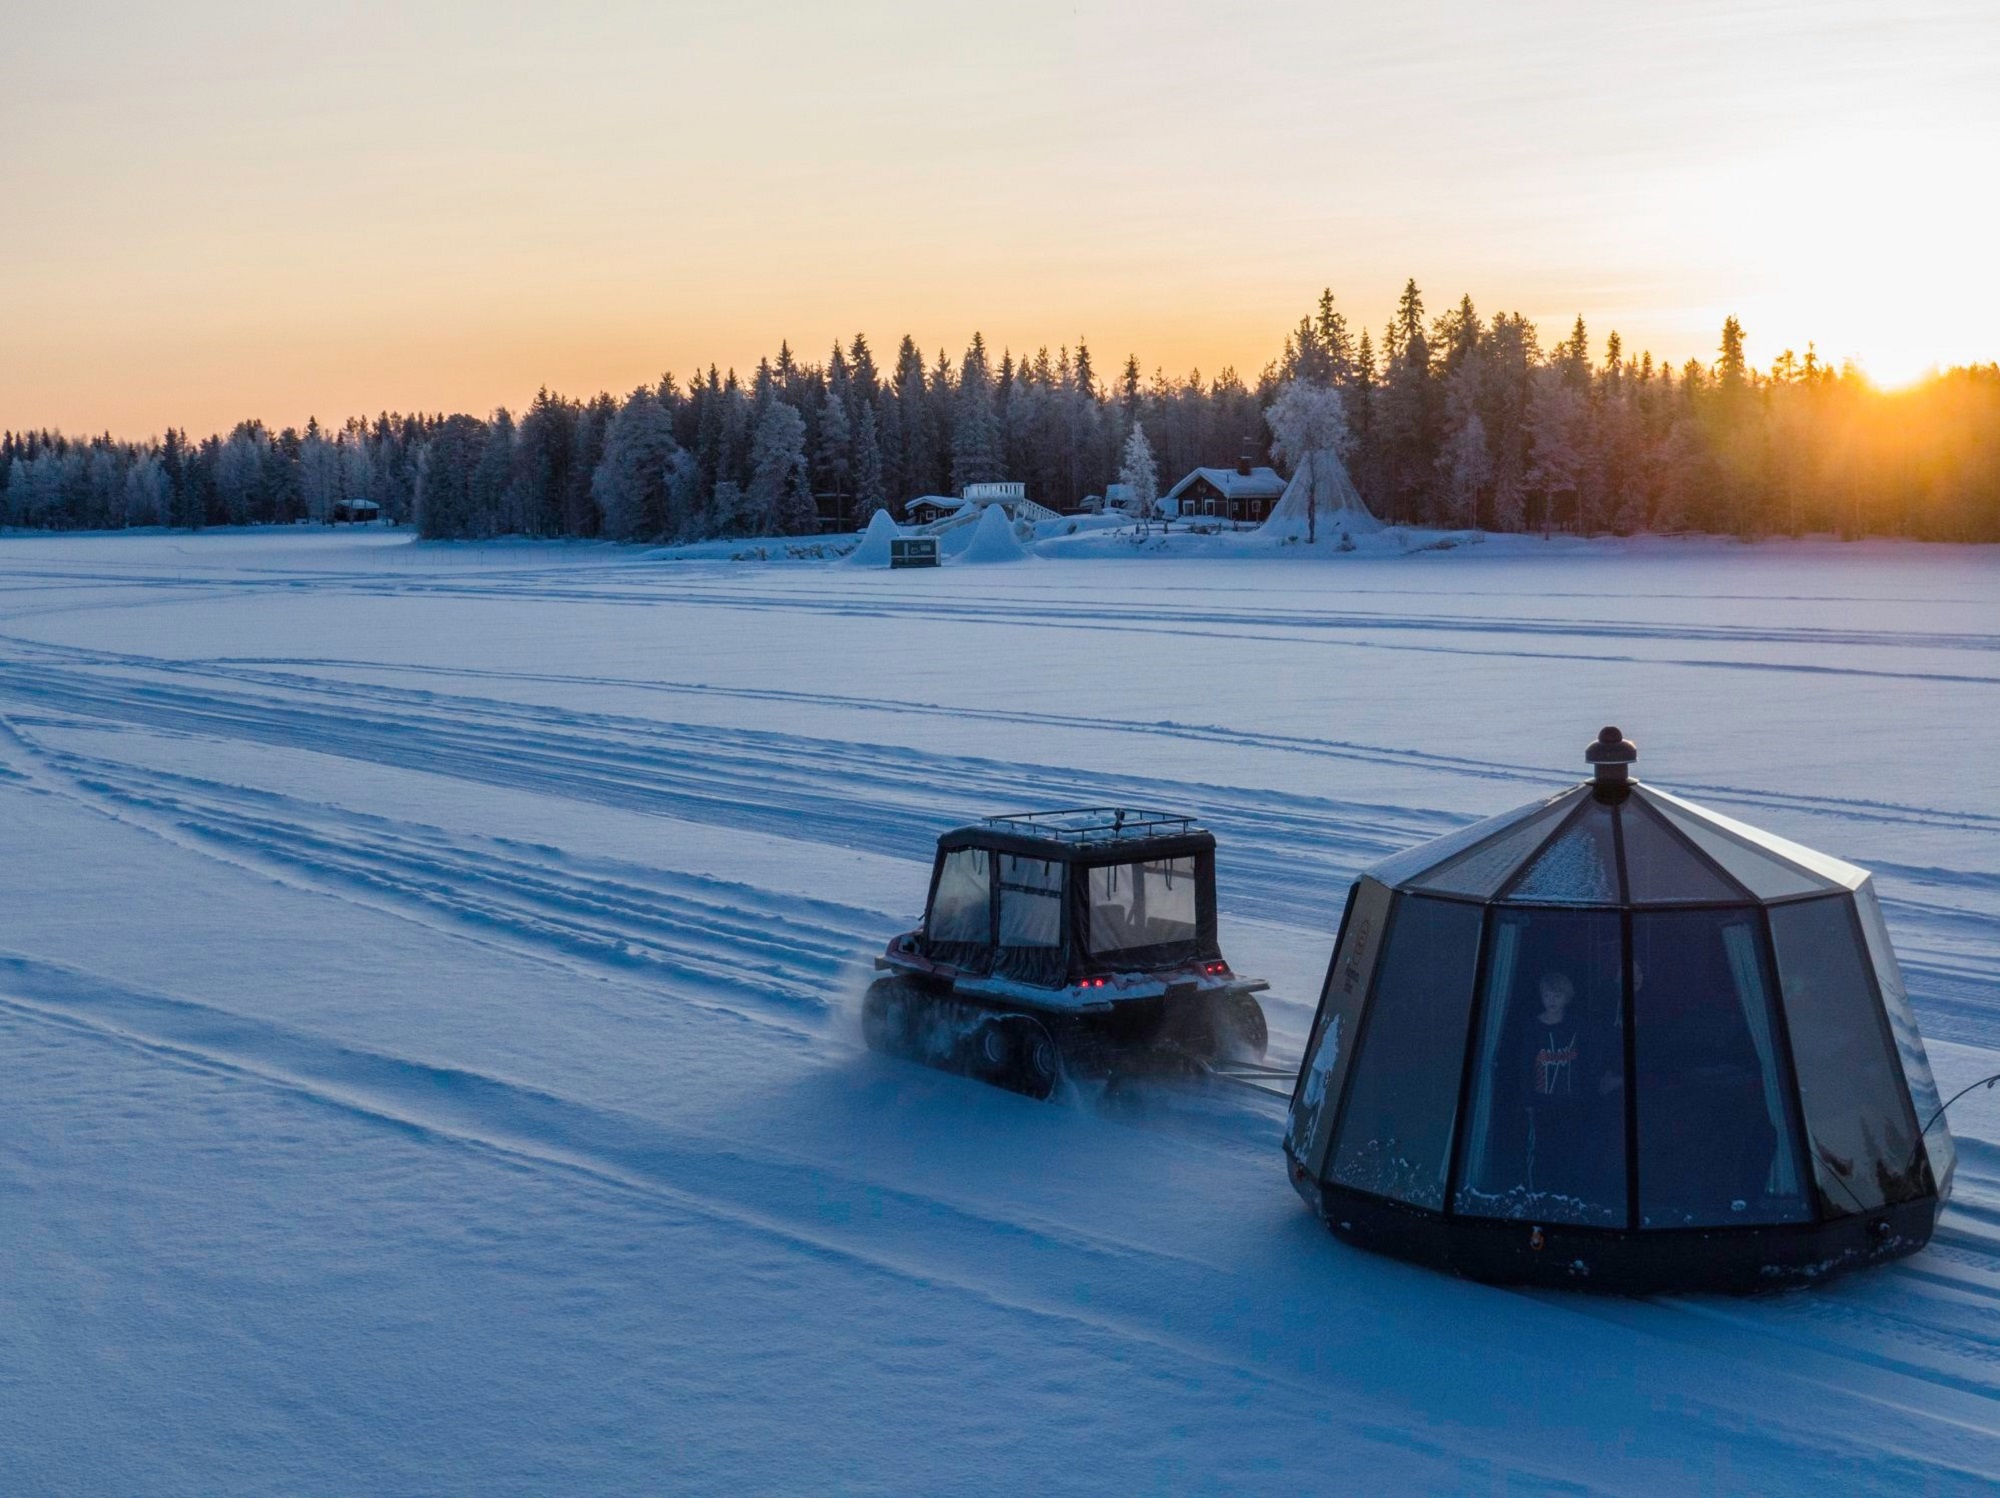 Get feedback from a vast remote working audience about AuroraHut Glass Igloos